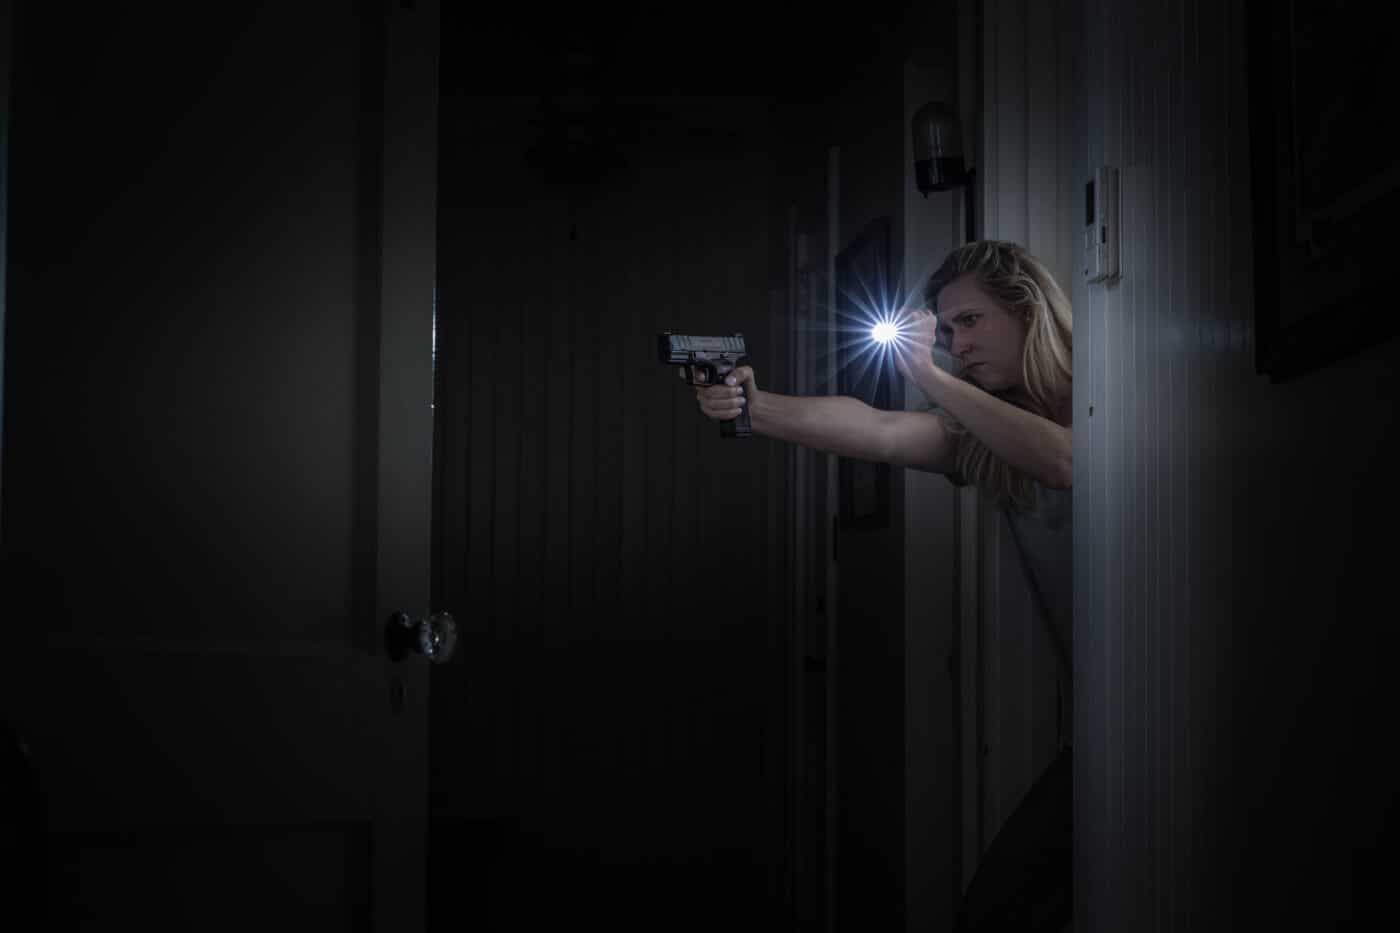 Woman shooting pistol at night in her home while holding a light